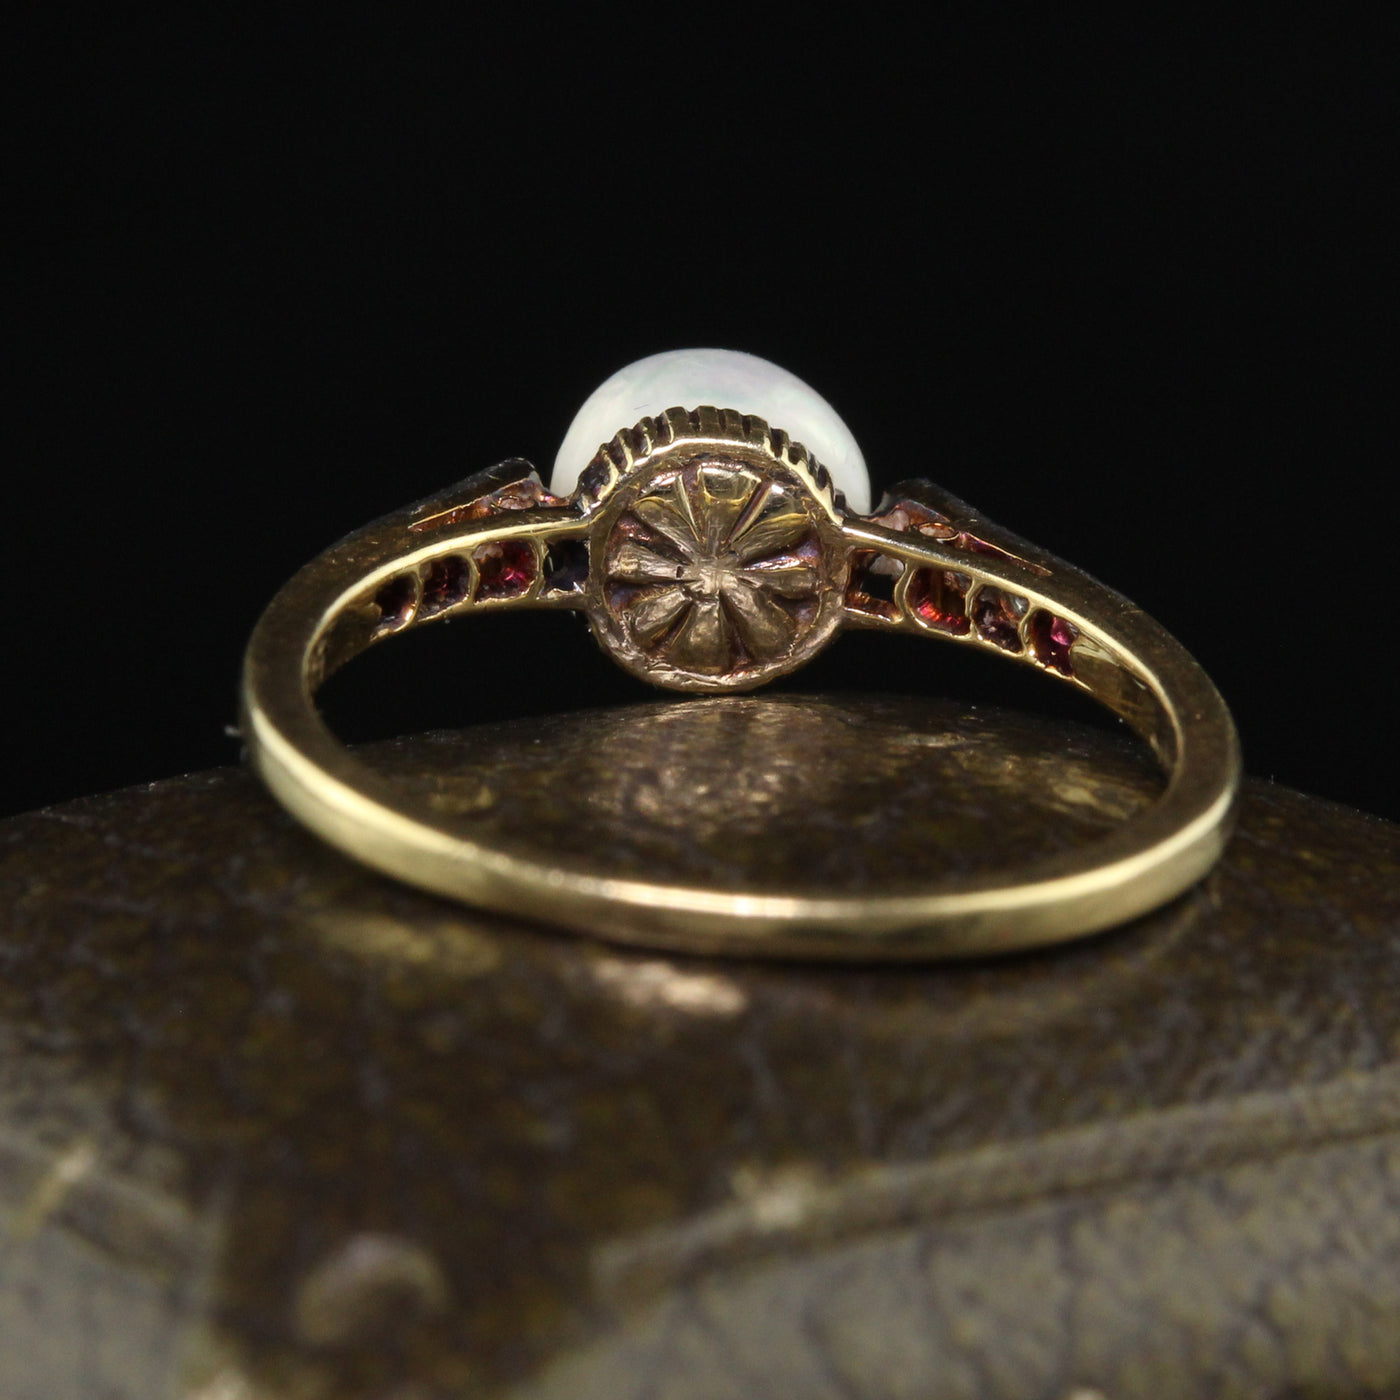 Antique Edwardian 14K Yellow Gold Diamond and Natural Pearl Engagement Ring